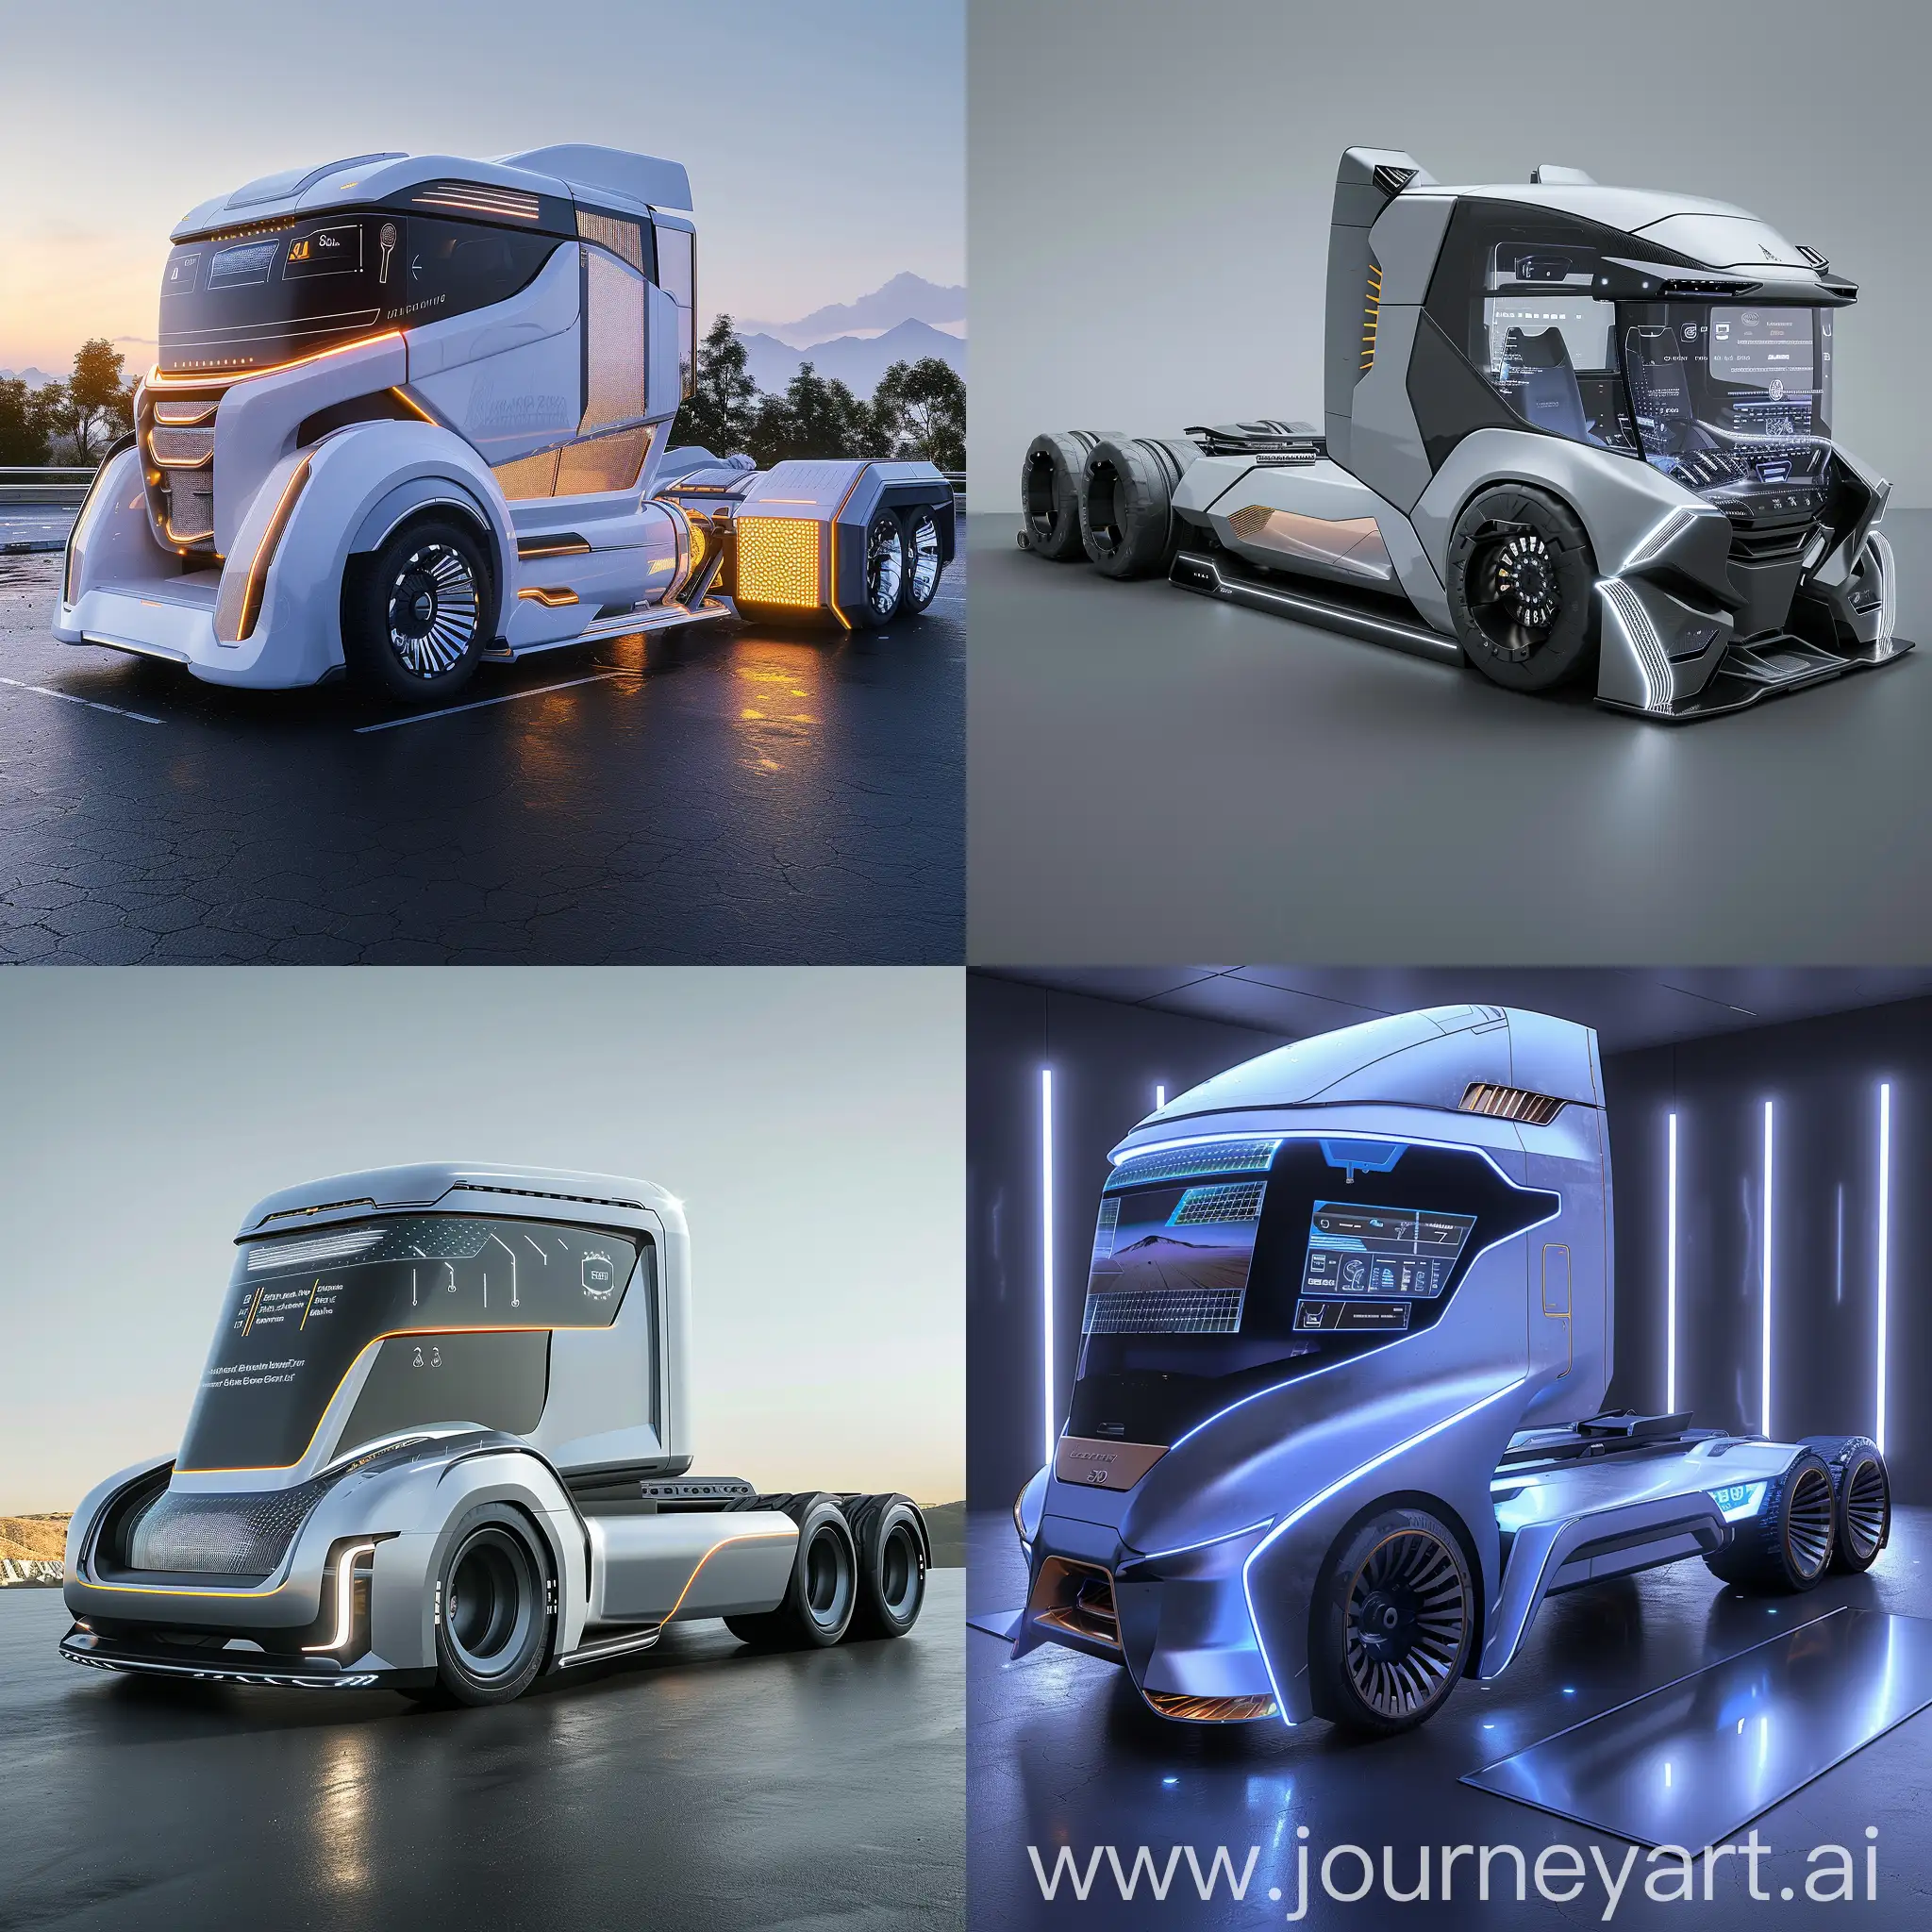 Futuristic-Autonomous-Truck-with-Augmented-Reality-Dashboard-and-Biometric-Recognition